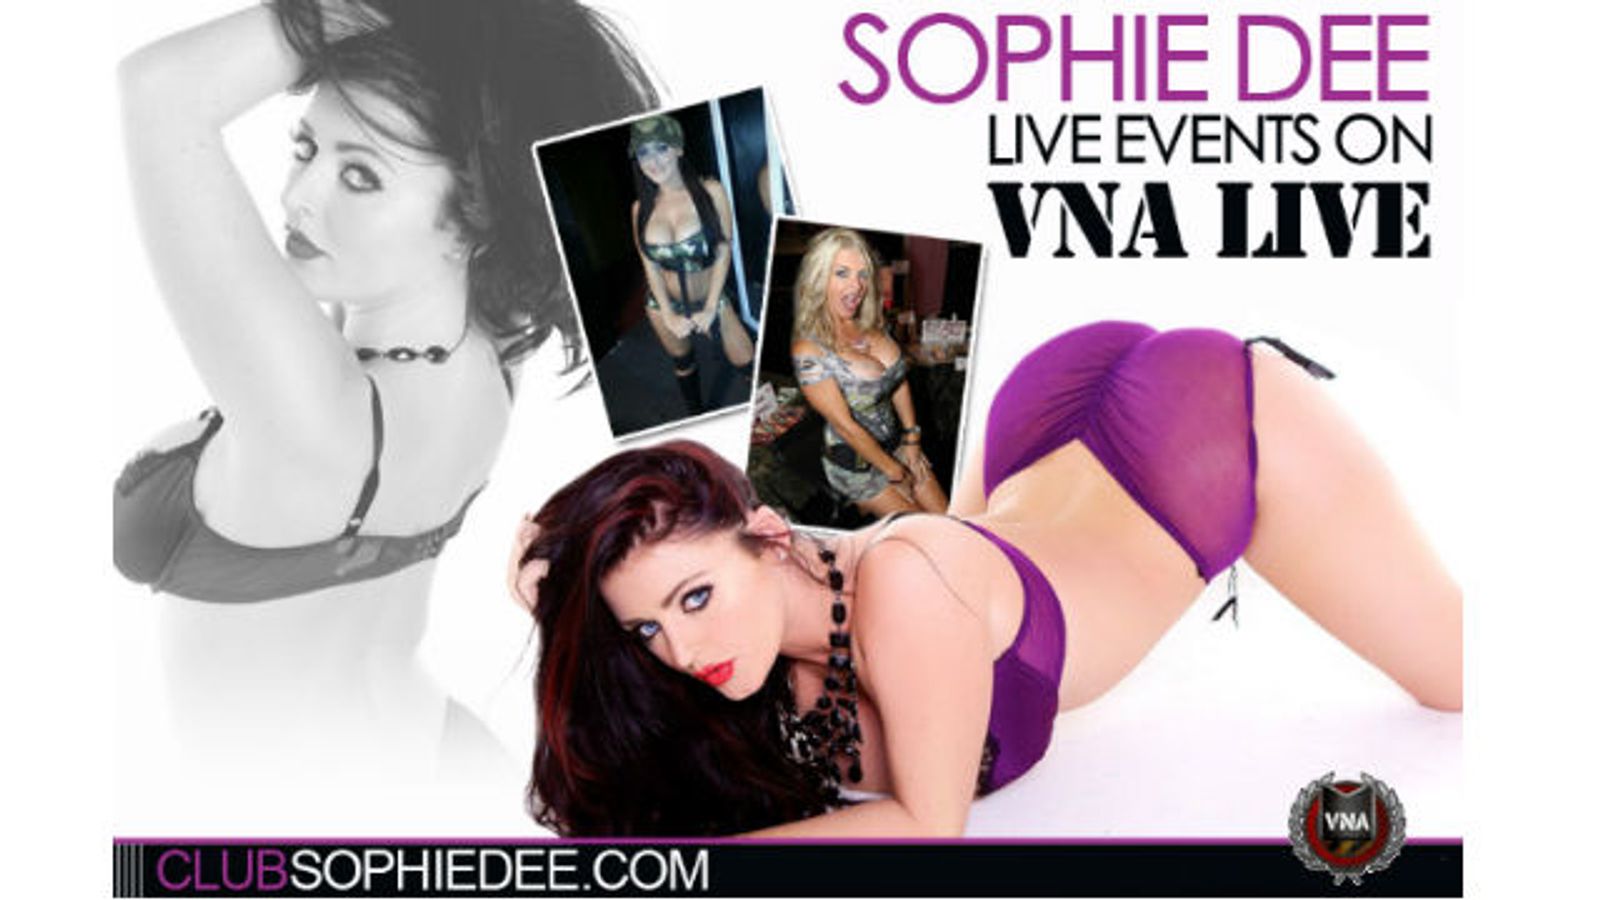 Sophie Dee Signs on to Vicky Vette's VNALive